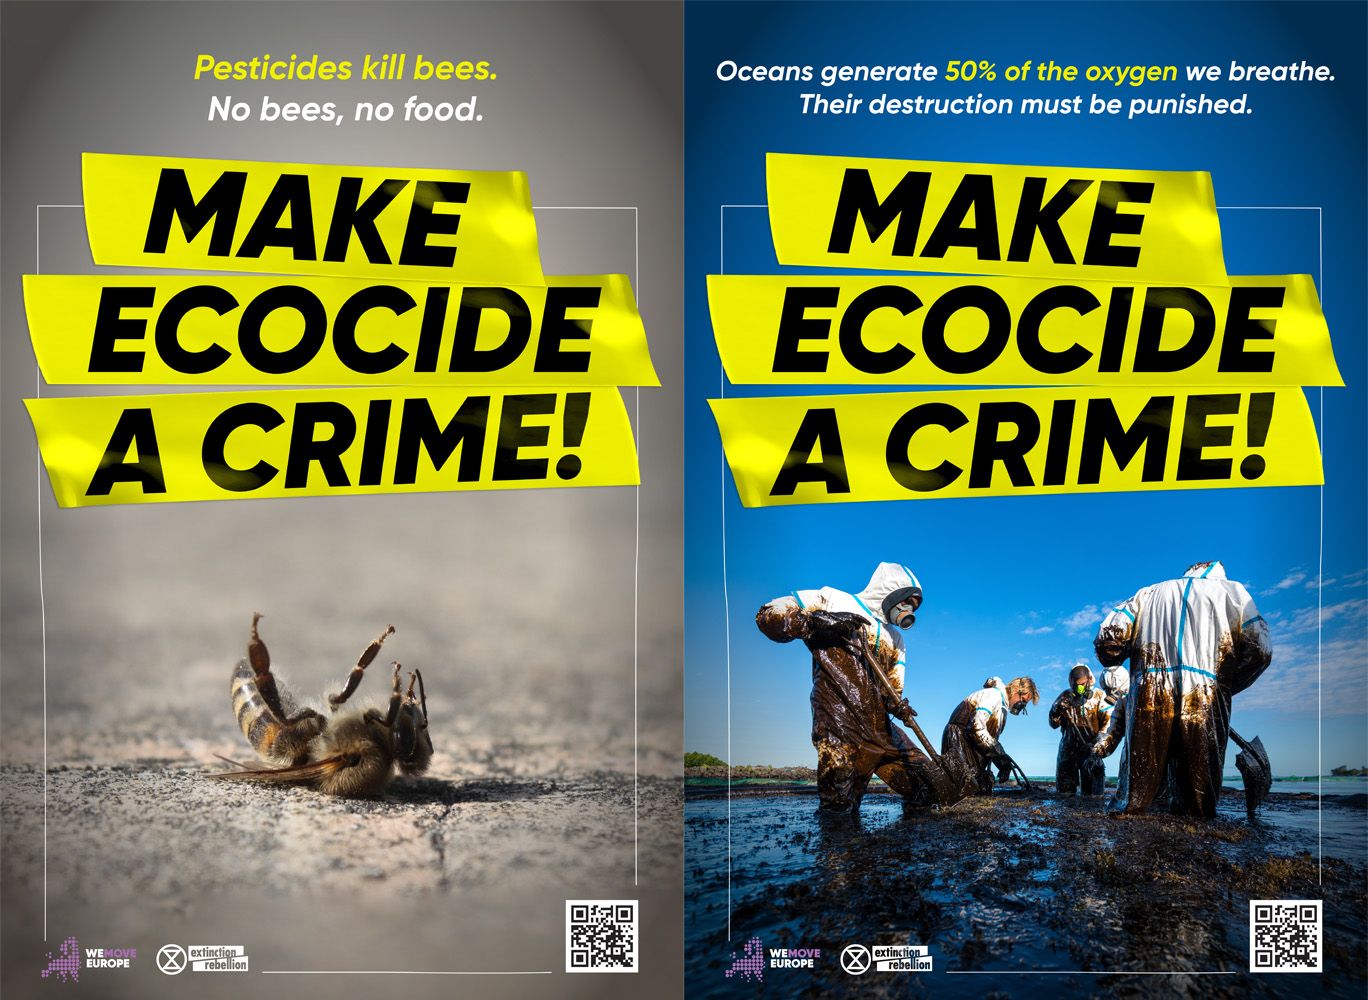 Two posters saying "Make ecocide a crime!"